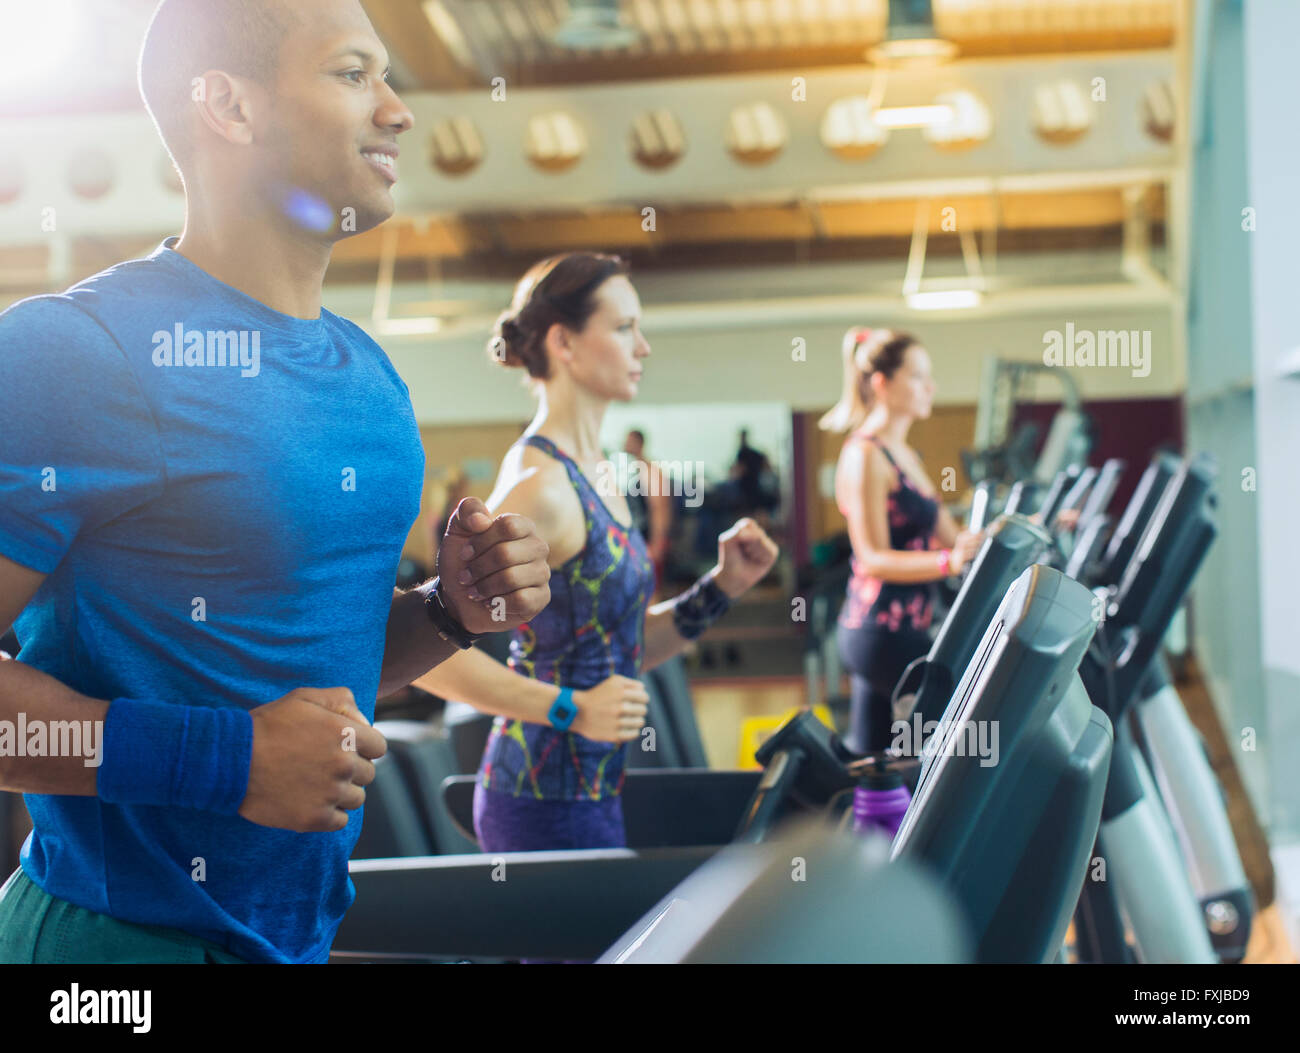 Smiling man running on treadmill at gym Stock Photo